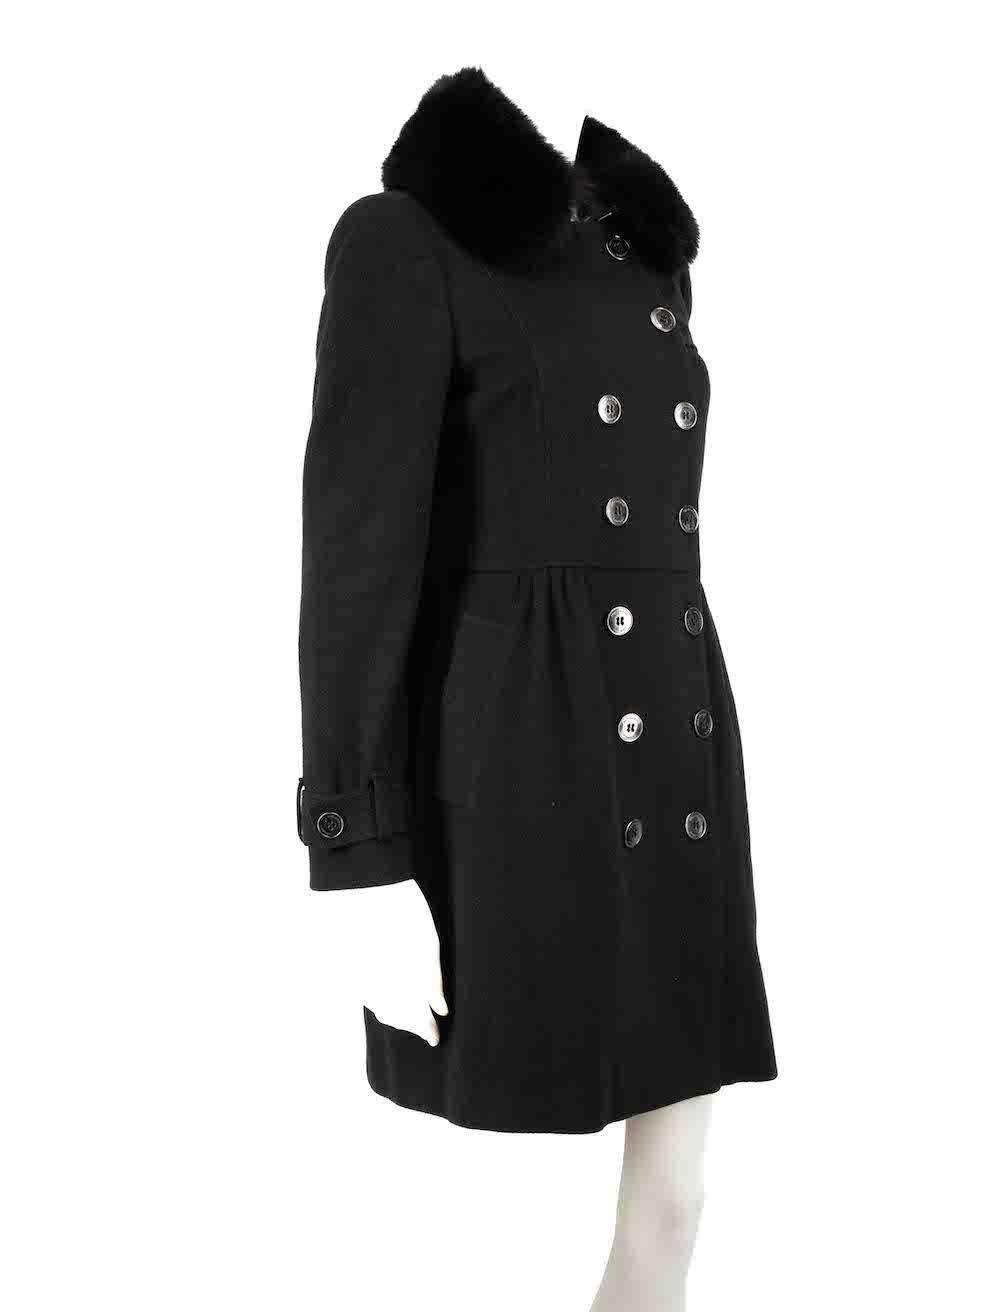 CONDITION is Very good. Minimal wear to coat is evident. Minimal wear to the exterior texture with light pilling on this used Burberry designer resale item.
 
 
 
 Details
 
 
 Black
 
 Wool
 
 Mid length coat
 
 Double breasted
 
 Buttoned cuffs
 
